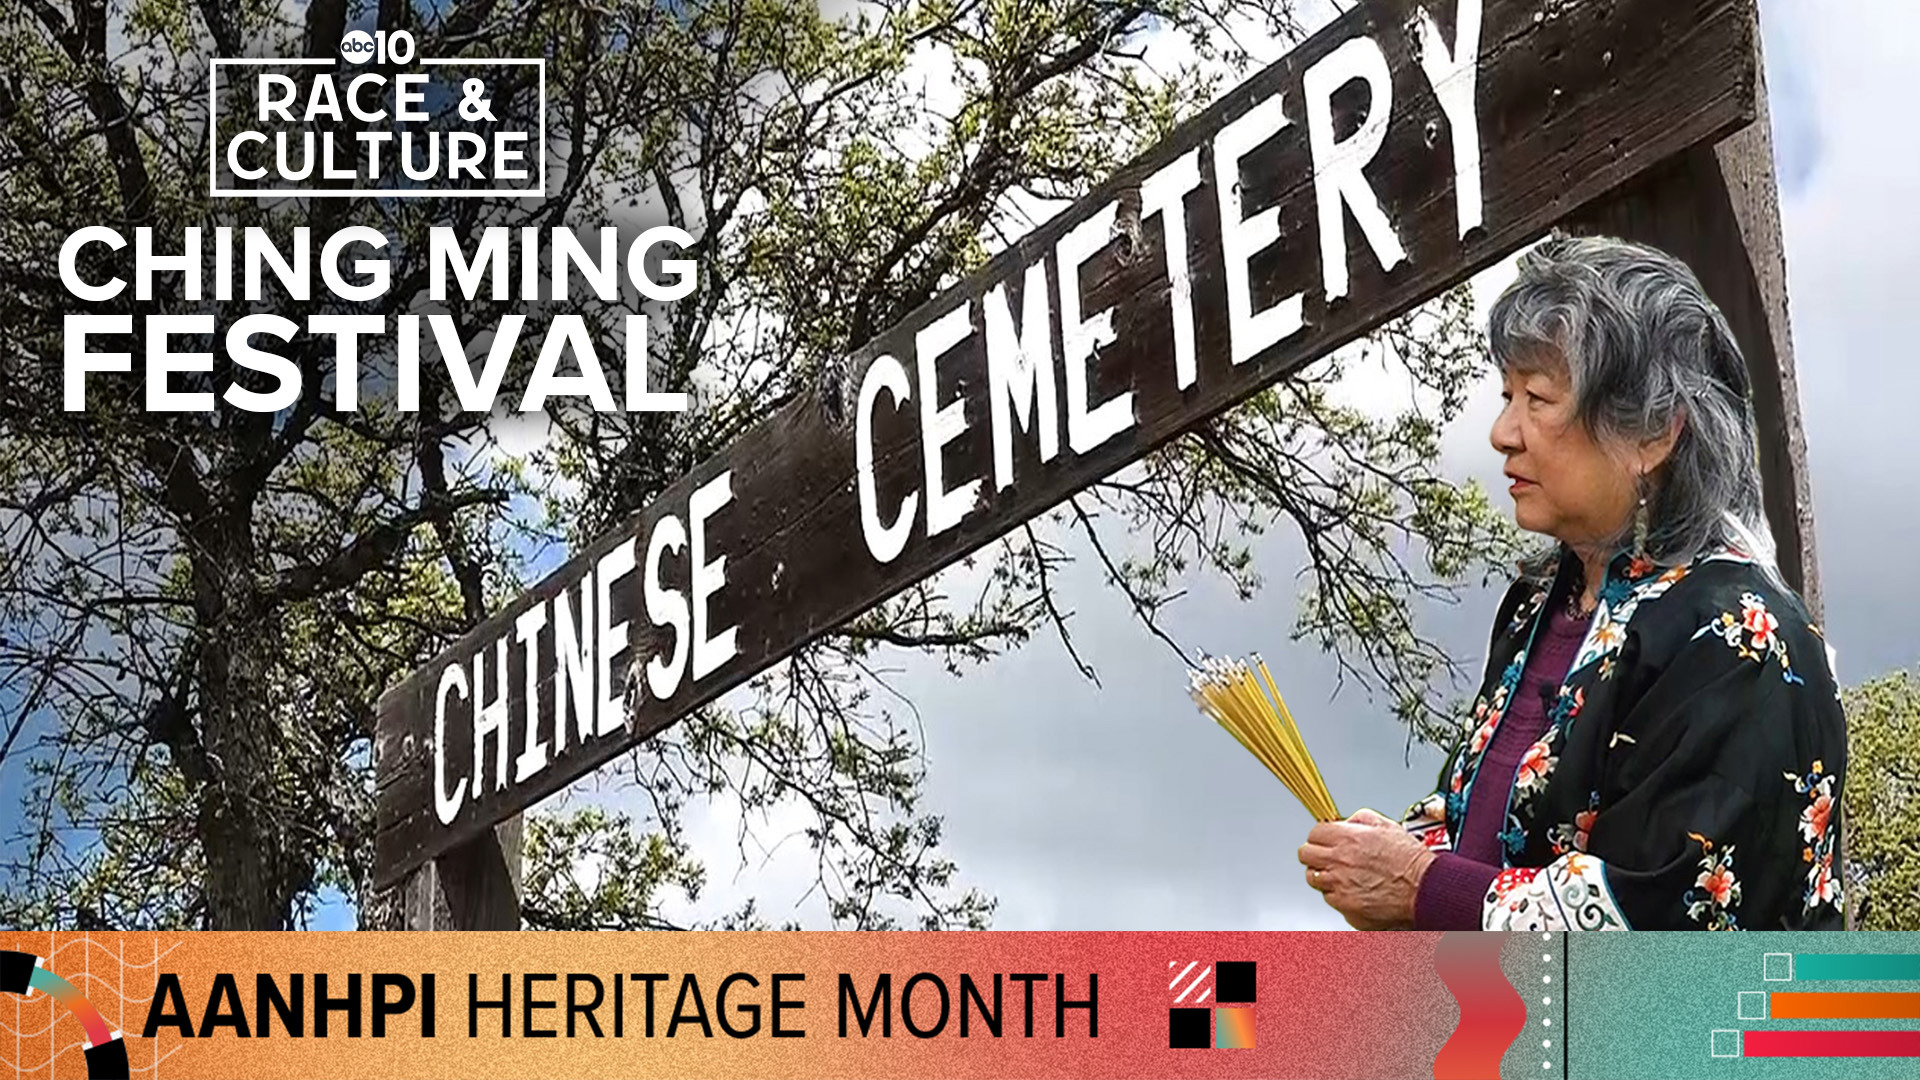 Prejudice gave birth to Auburn's Chinese Cemetery in the early 19th century. Now, descendants are reviving an ancient way of honoring their ancestors.